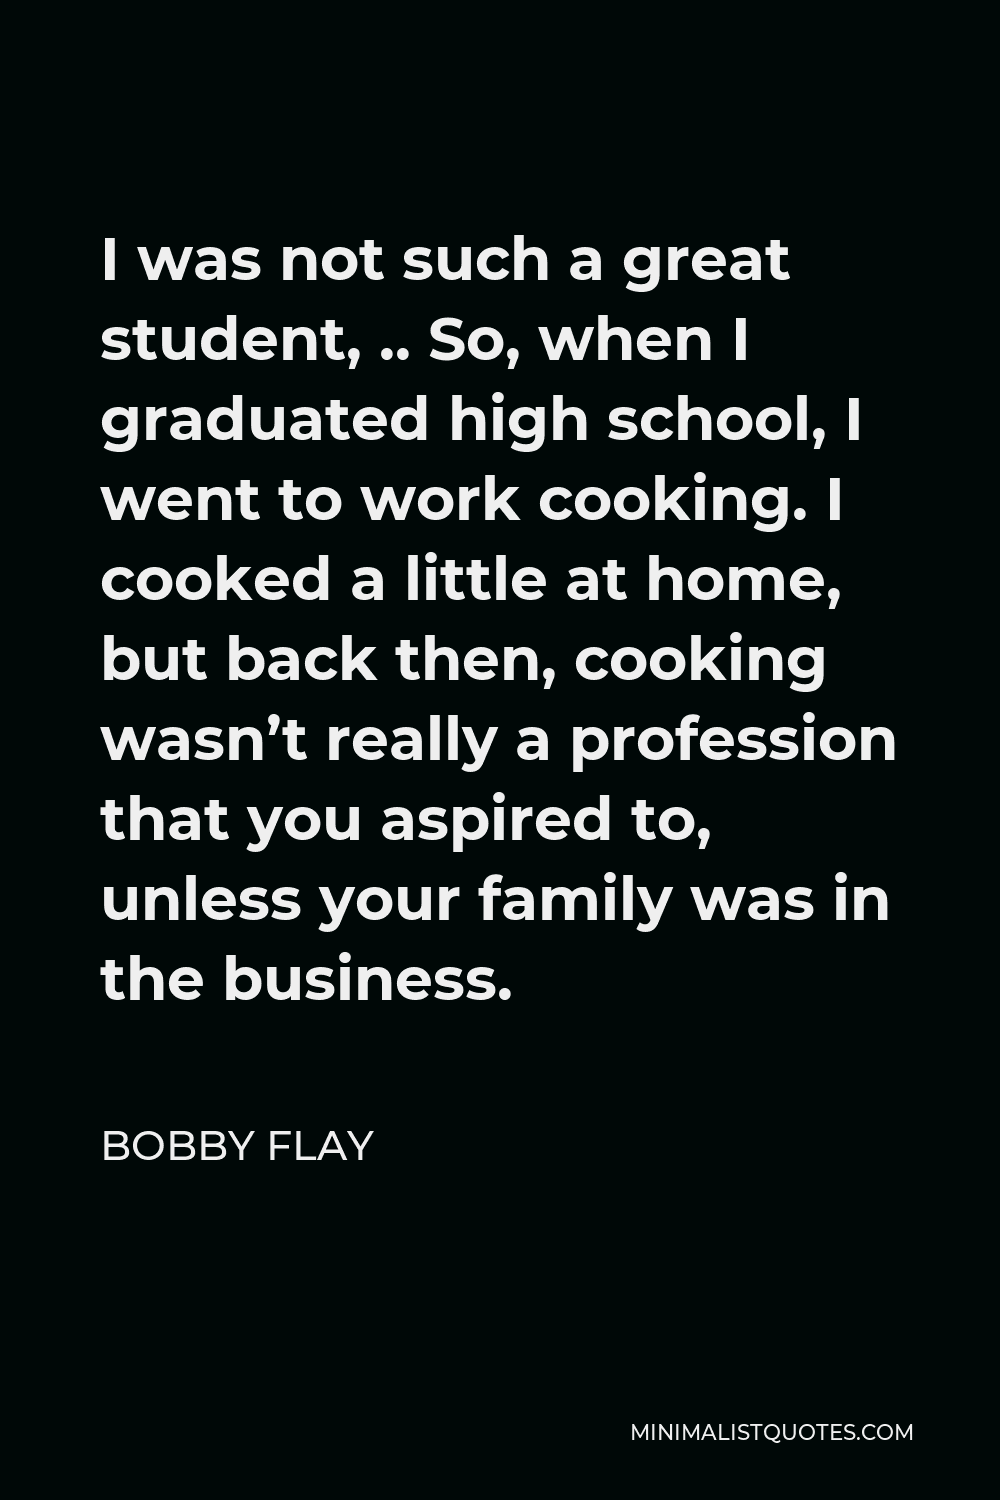 Bobby Flay Quote - I was not such a great student, .. So, when I graduated high school, I went to work cooking. I cooked a little at home, but back then, cooking wasn’t really a profession that you aspired to, unless your family was in the business.